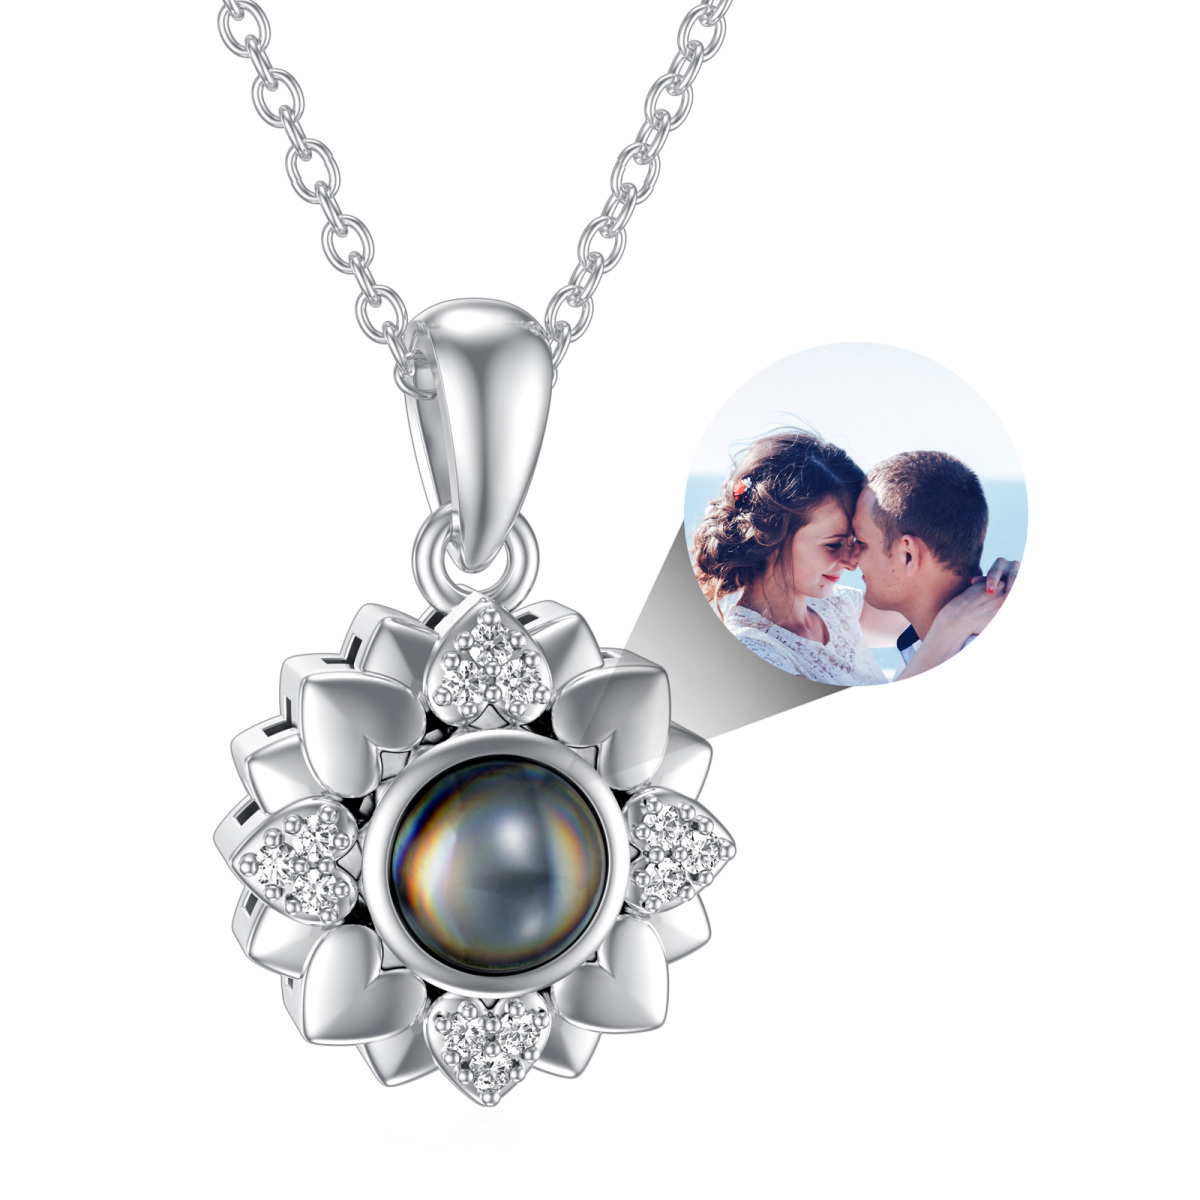 Sterling Silver Projection Stone & Personalized Projection Sunflower & Personalized Photo Pendant Necklace-1